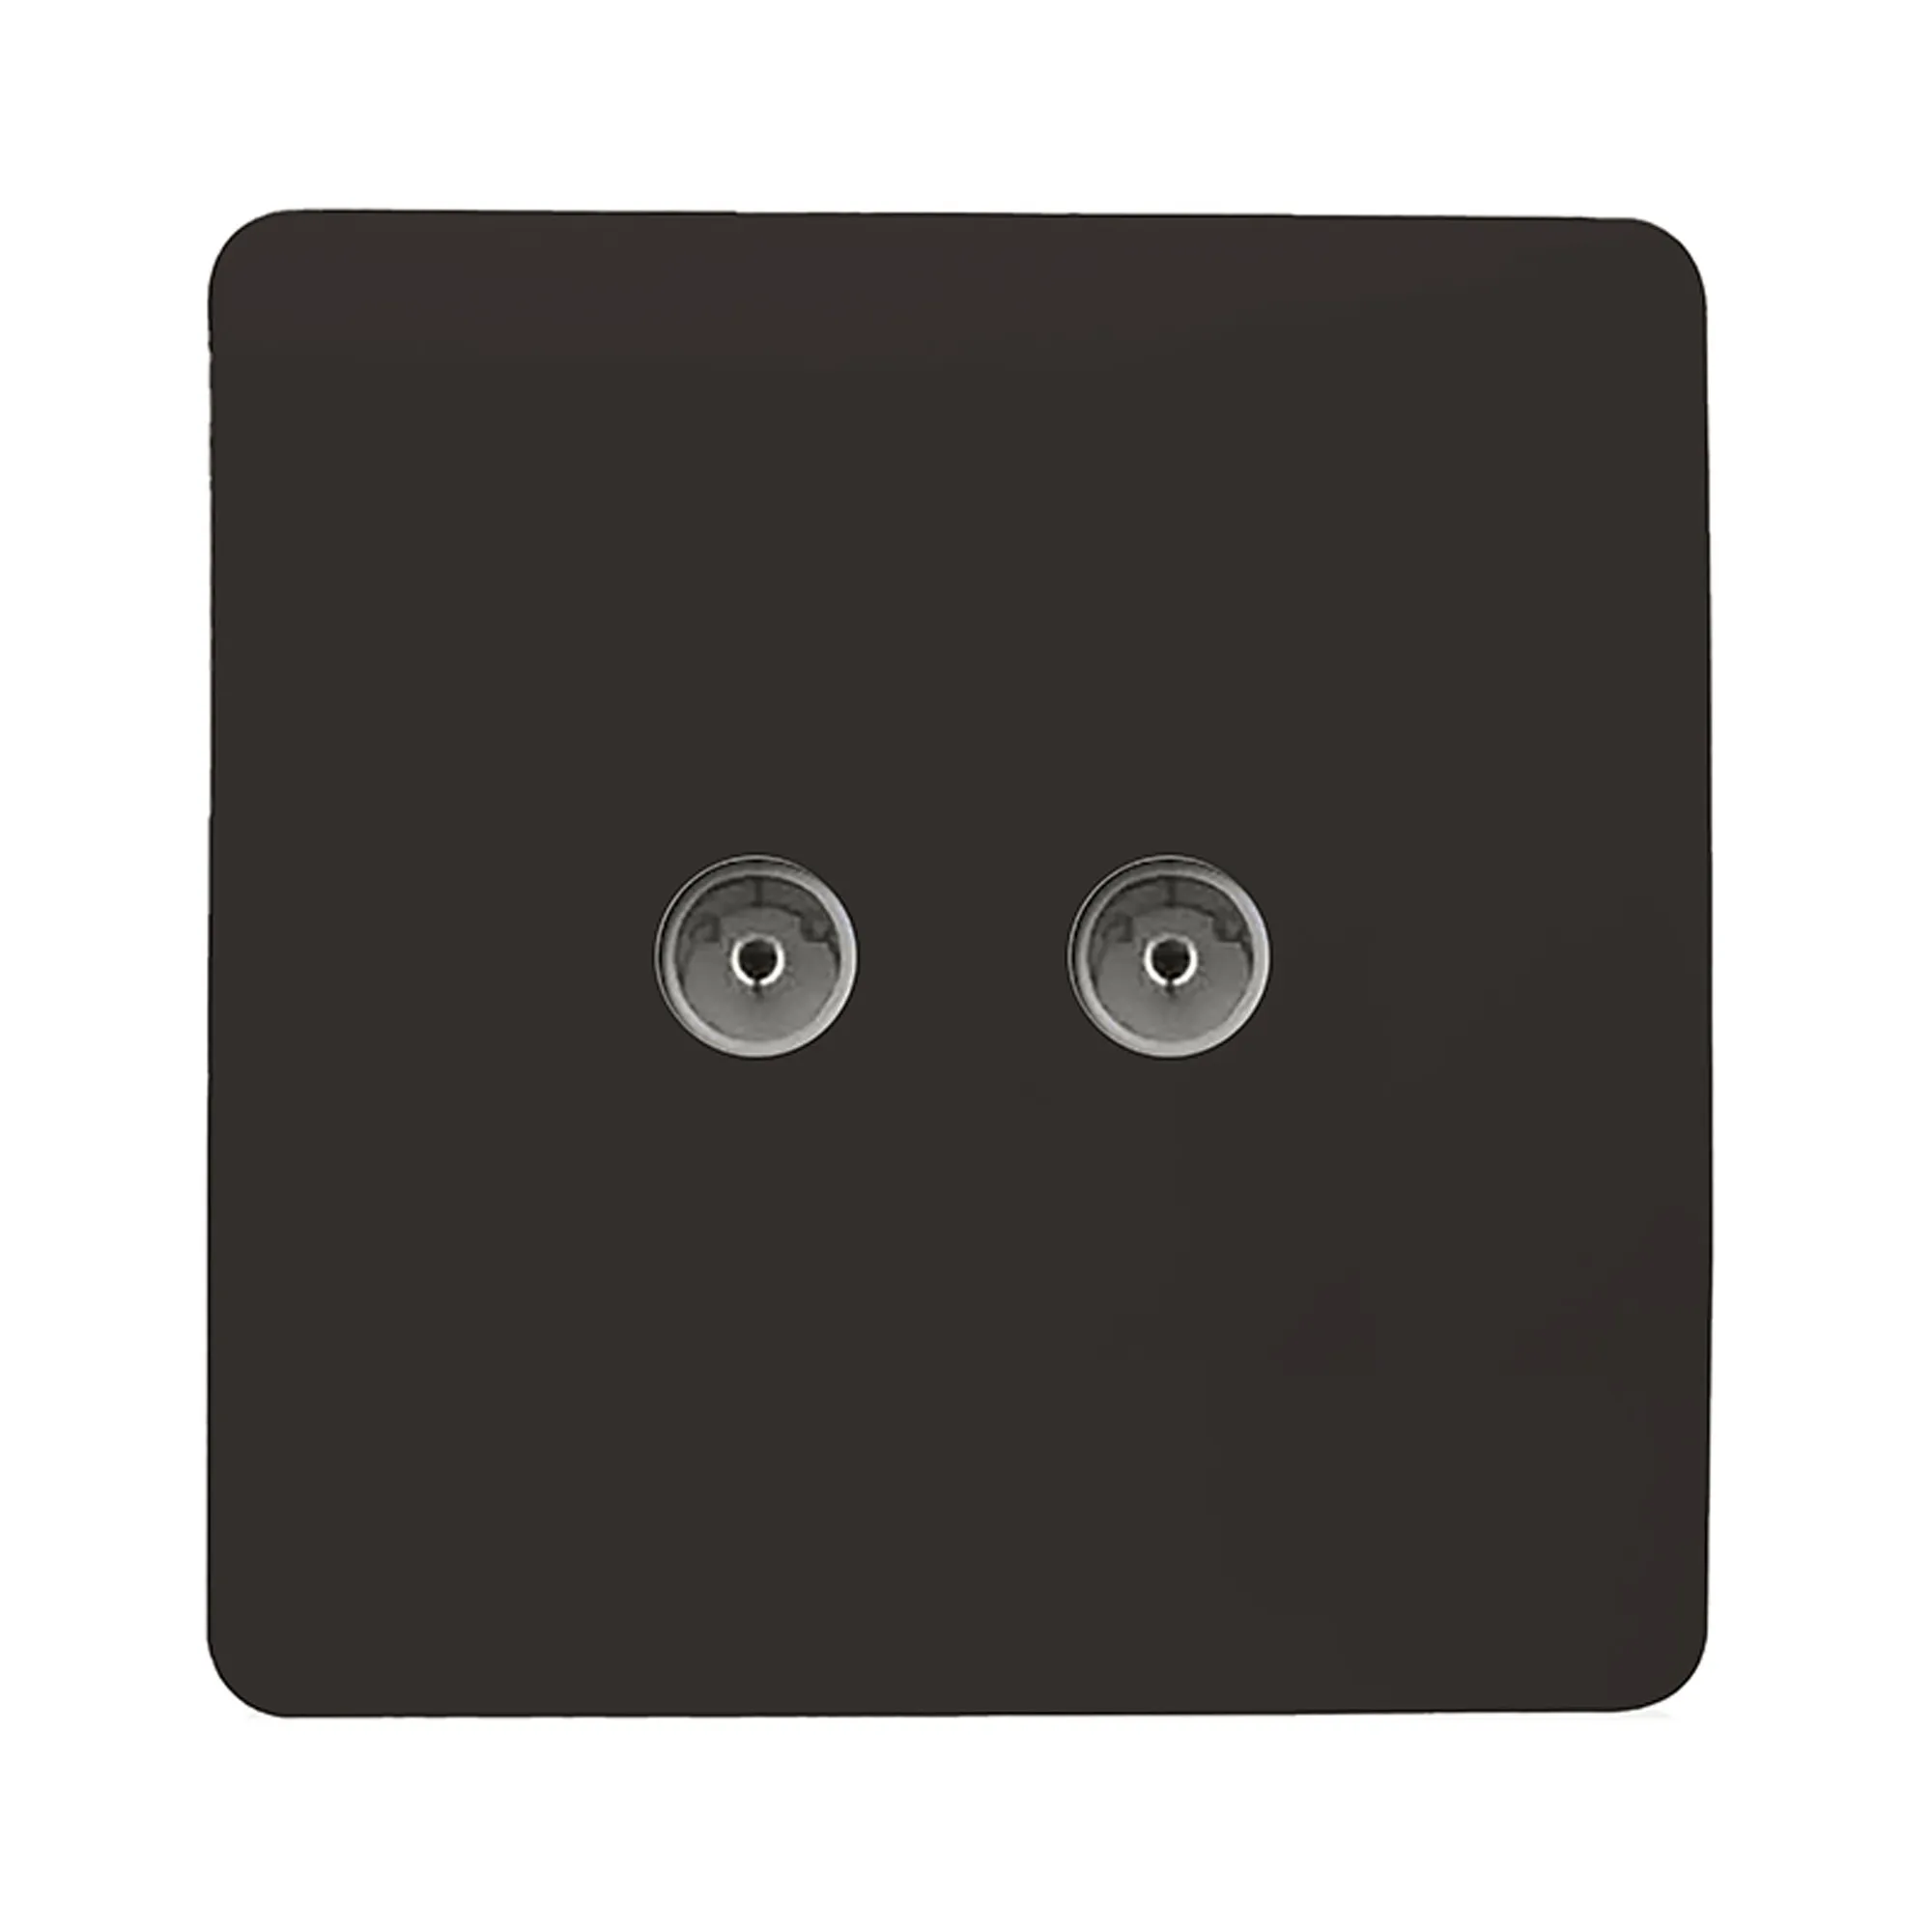 Twin TV Co-Axial Outlet Dark Brown